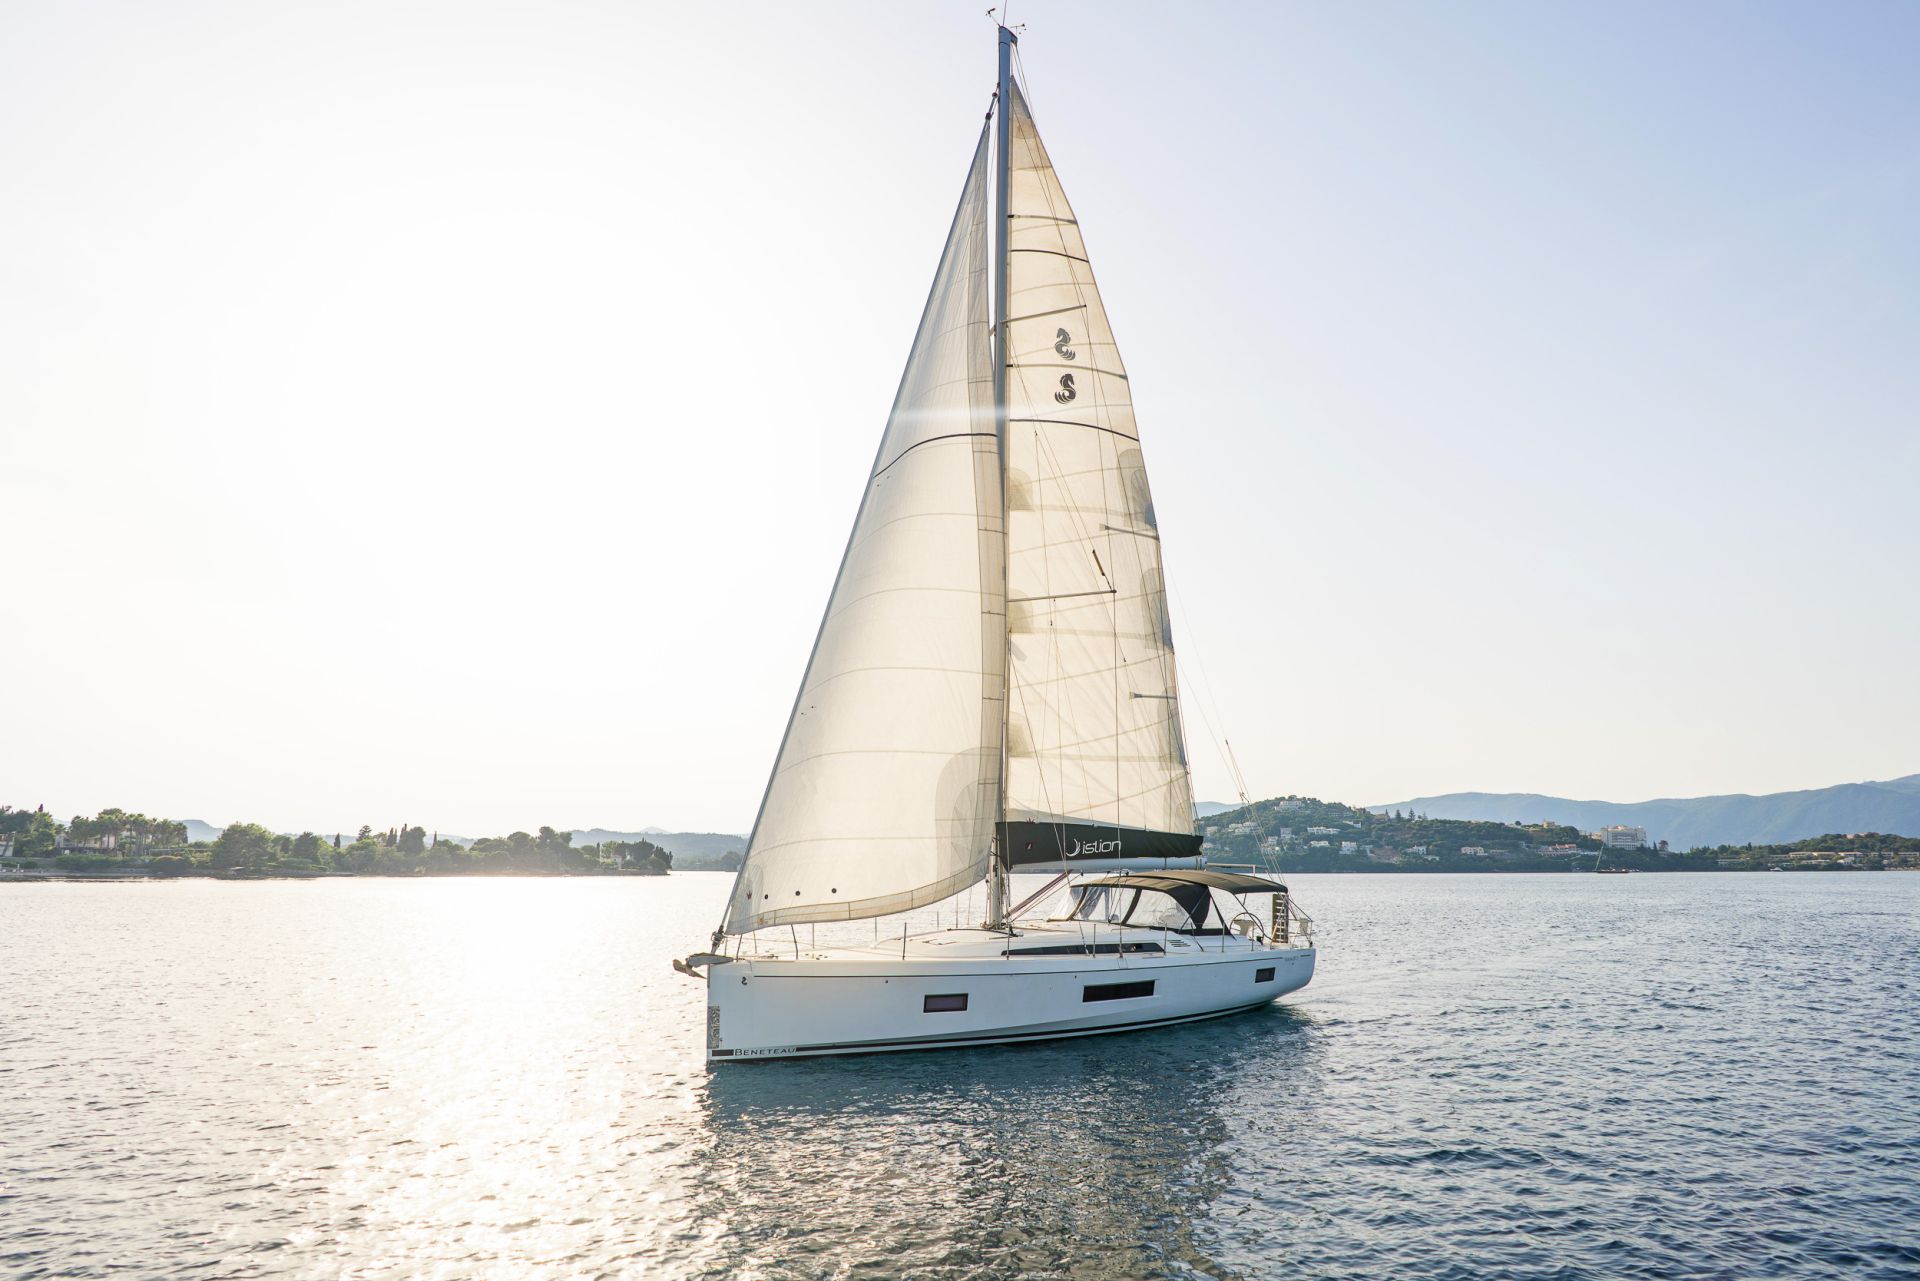 Oceanis 51.1 - 5 + 1 cab. - Alimos Yacht Charter & Boat hire in Greece Athens and Saronic Gulf Athens Alimos Alimos Marina 6